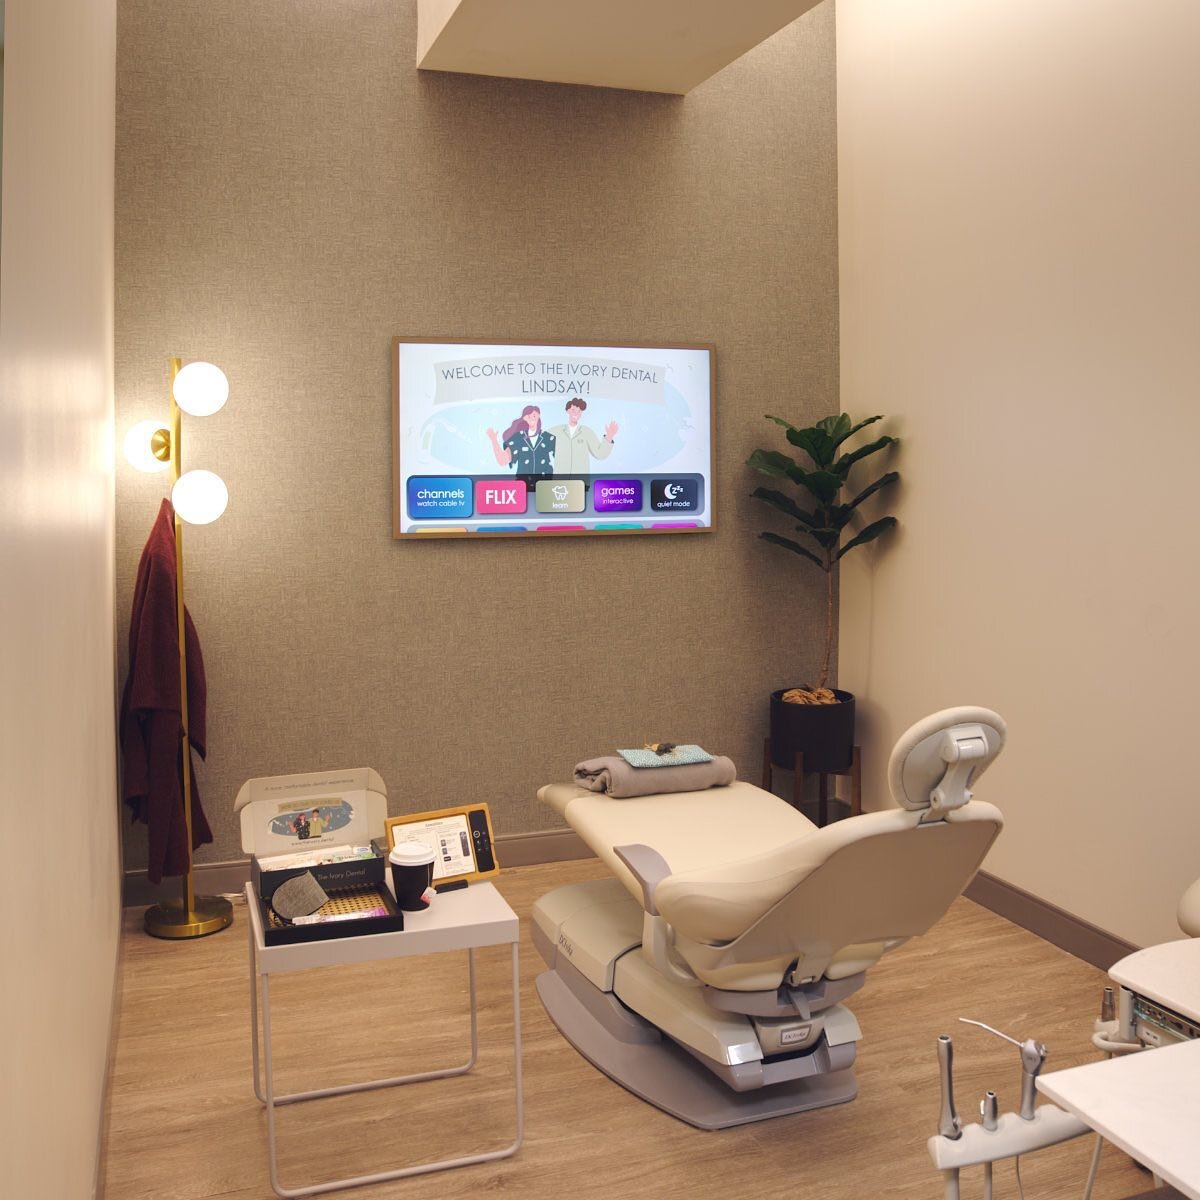 Looking for a more relaxing and comfortable dental experience? ✨ Our treatment rooms are customized by you, the patient! We offer convenient online booking, in-office amenities, late appointments and same day treatment to fit your busy schedules! Cli